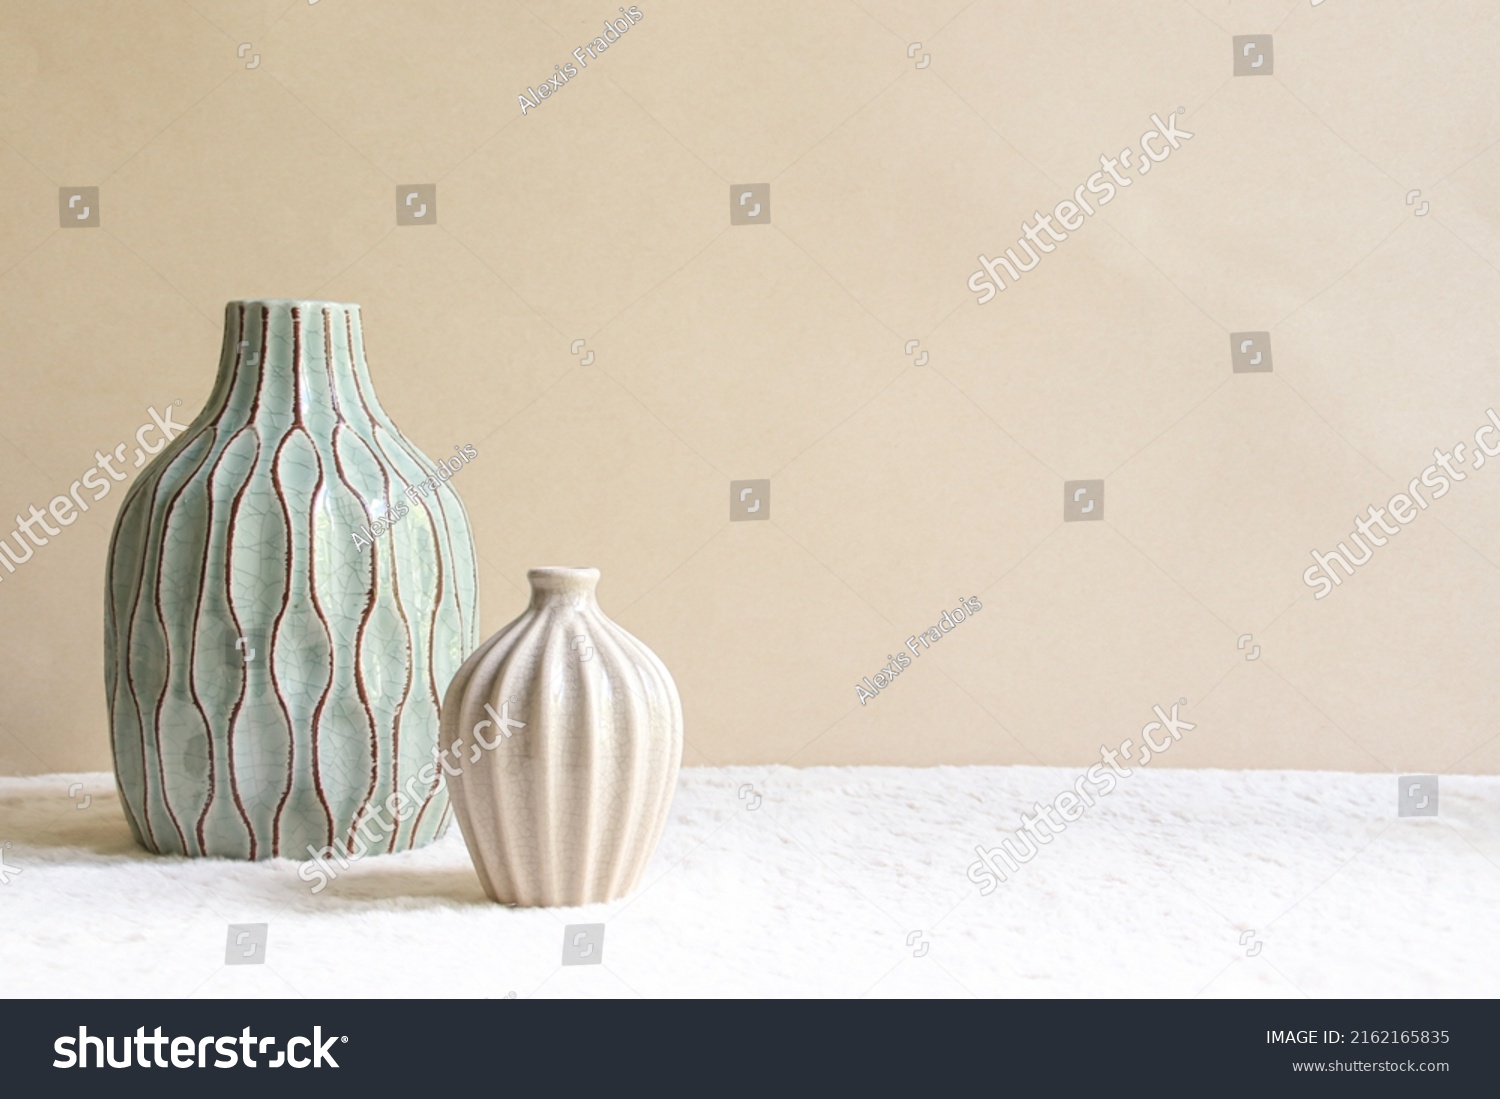 Duo of vases on a beige background. A medium sized sky blue vase with brown grooves and a small beige vase.  #2162165835